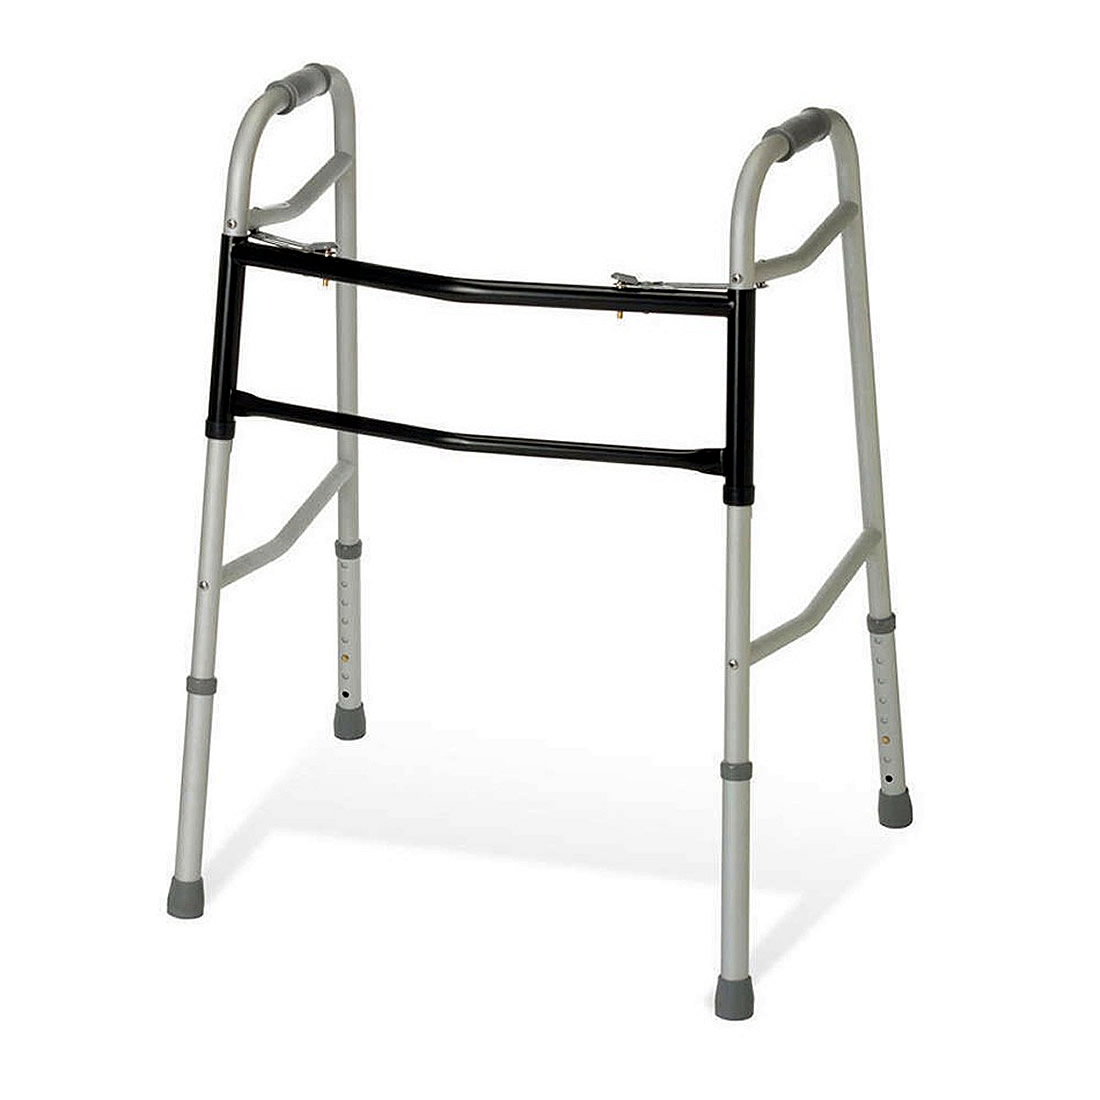 Sicily accessible holiday disabled walking frame rent equipment service